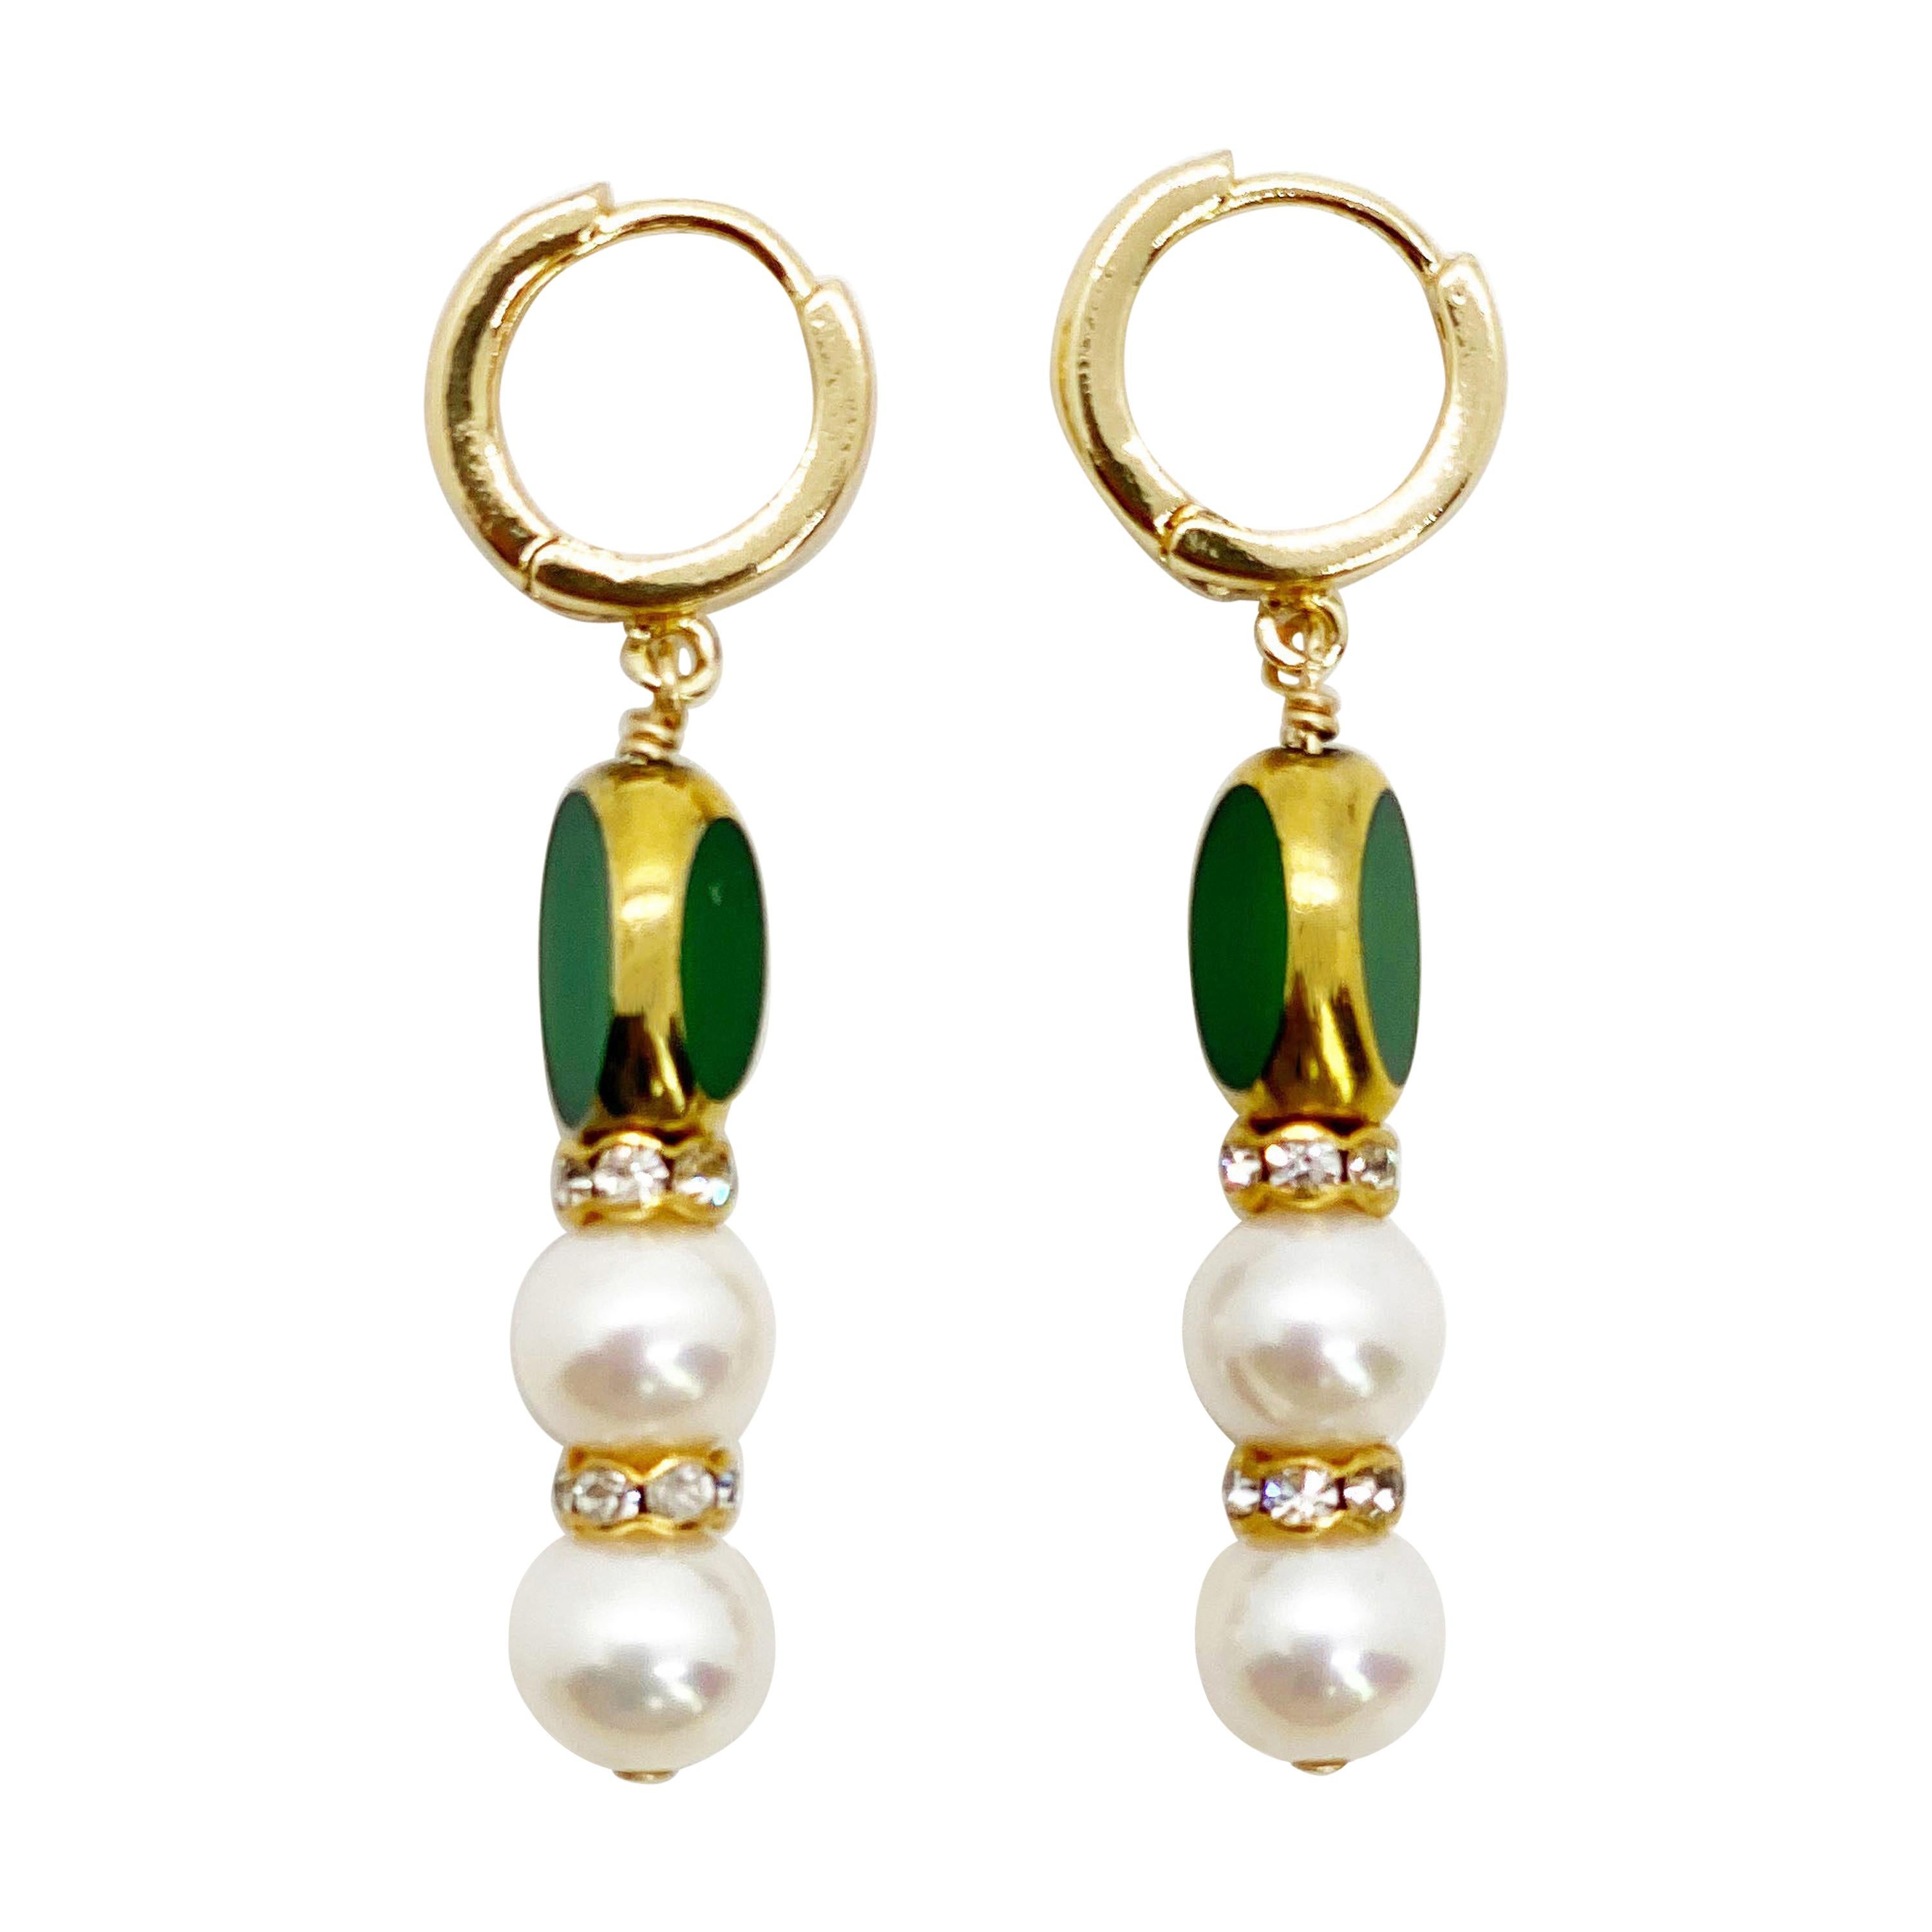 Pearls & Matte Green Vintage German Glass Beads edged with 24K gold Earrings